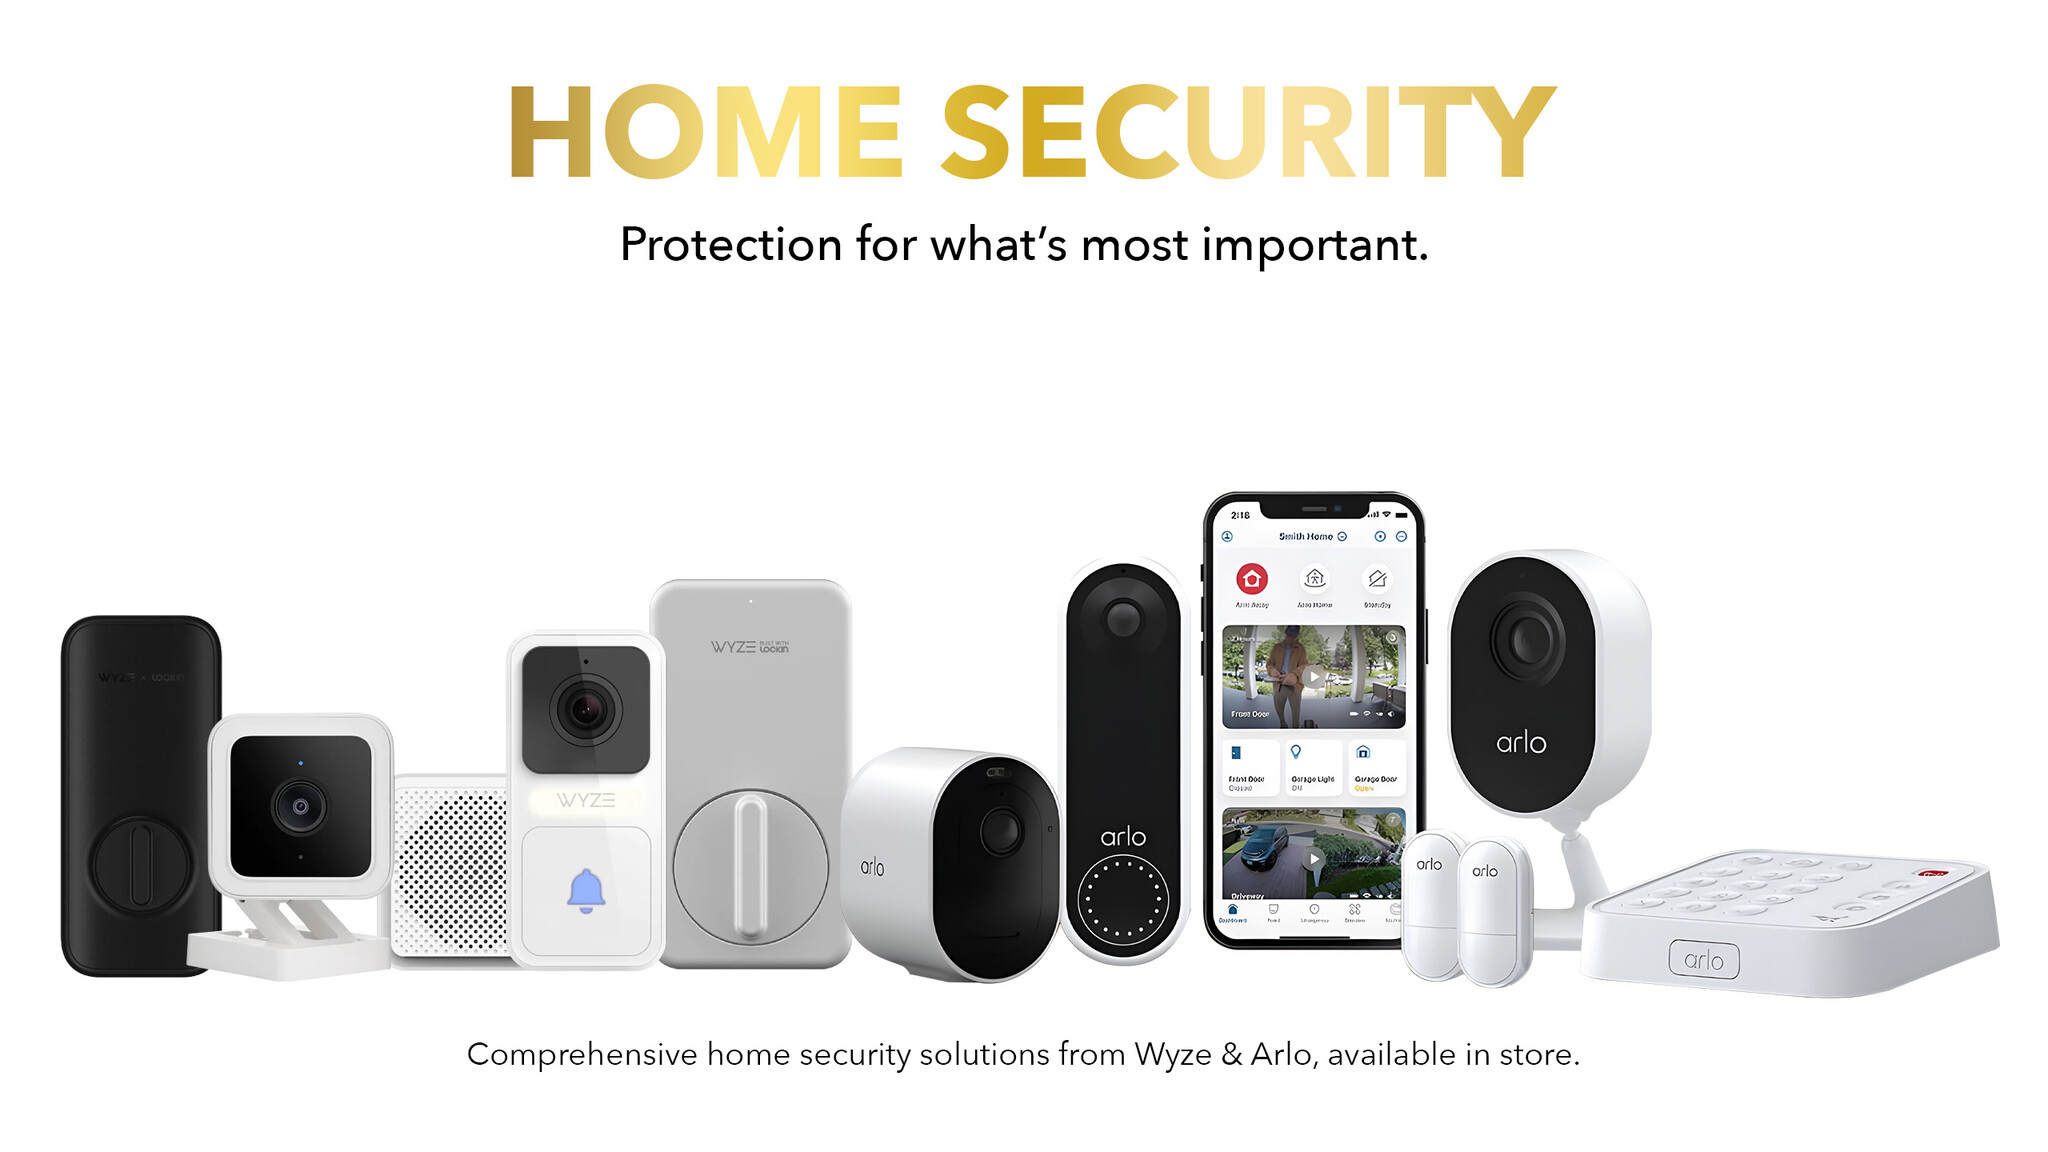 Home Security